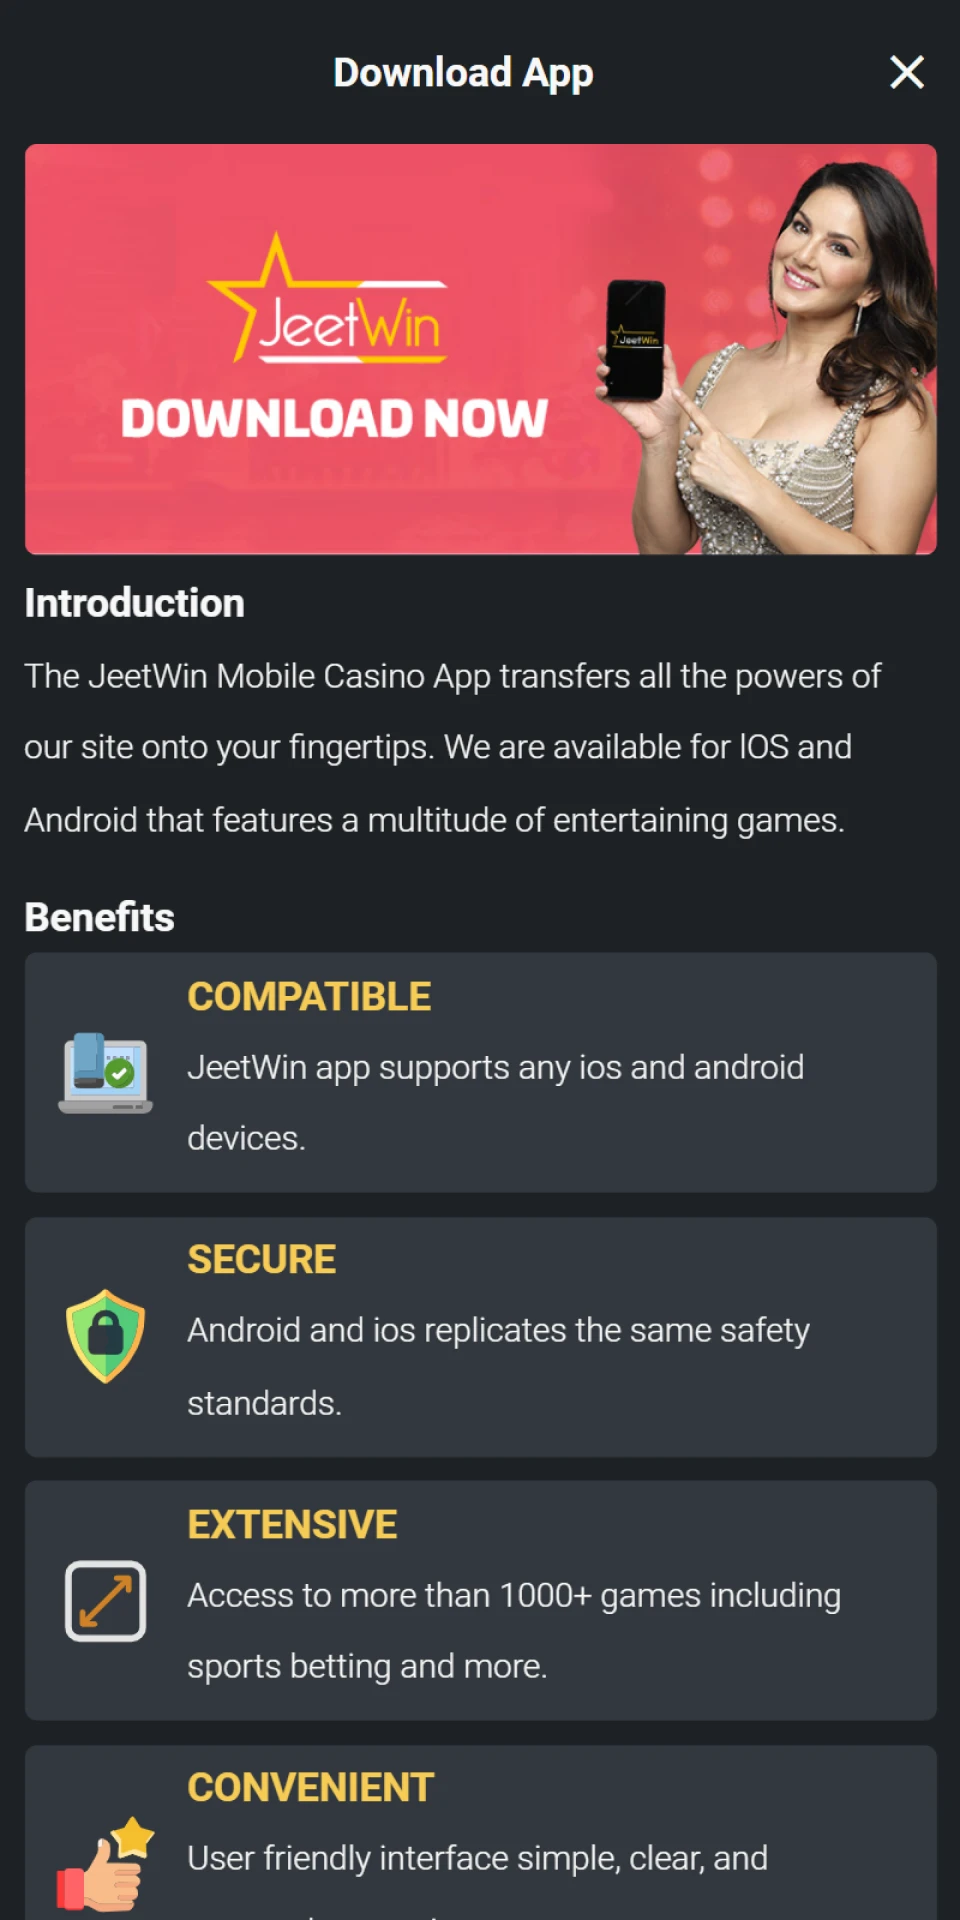 Download Jeetwin APK on your phone.